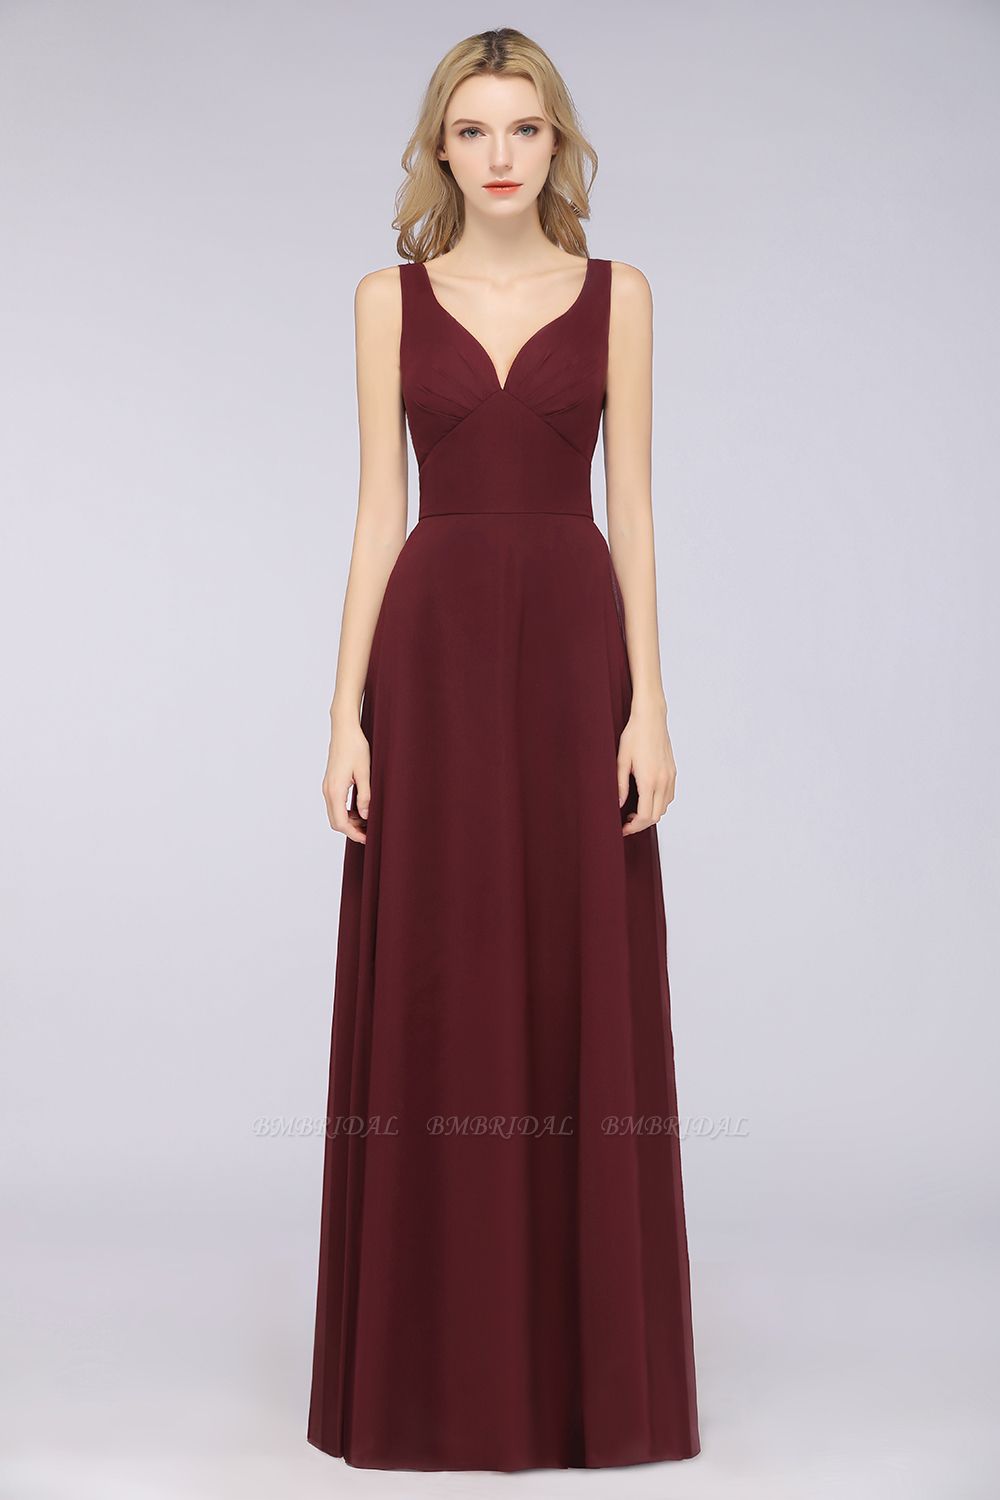 BMbridal Chic Chiffon V-Neck Straps Ruffle Affordable Bridesmaid Dresses with Open Back